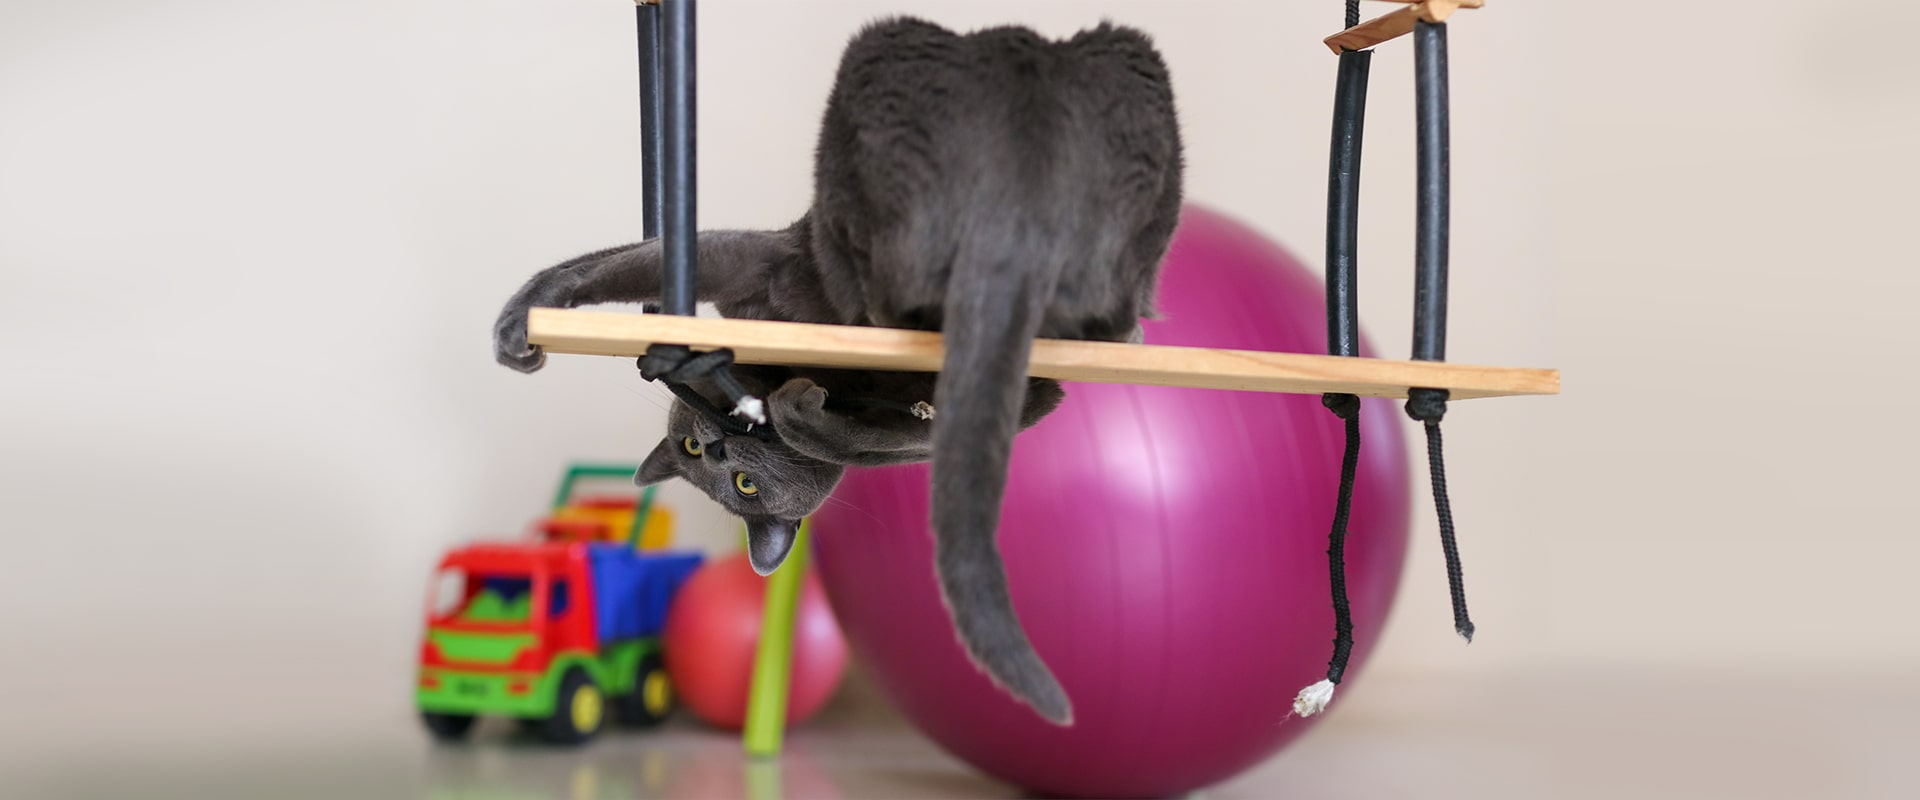 russian blue cat playing on a swing with other toys